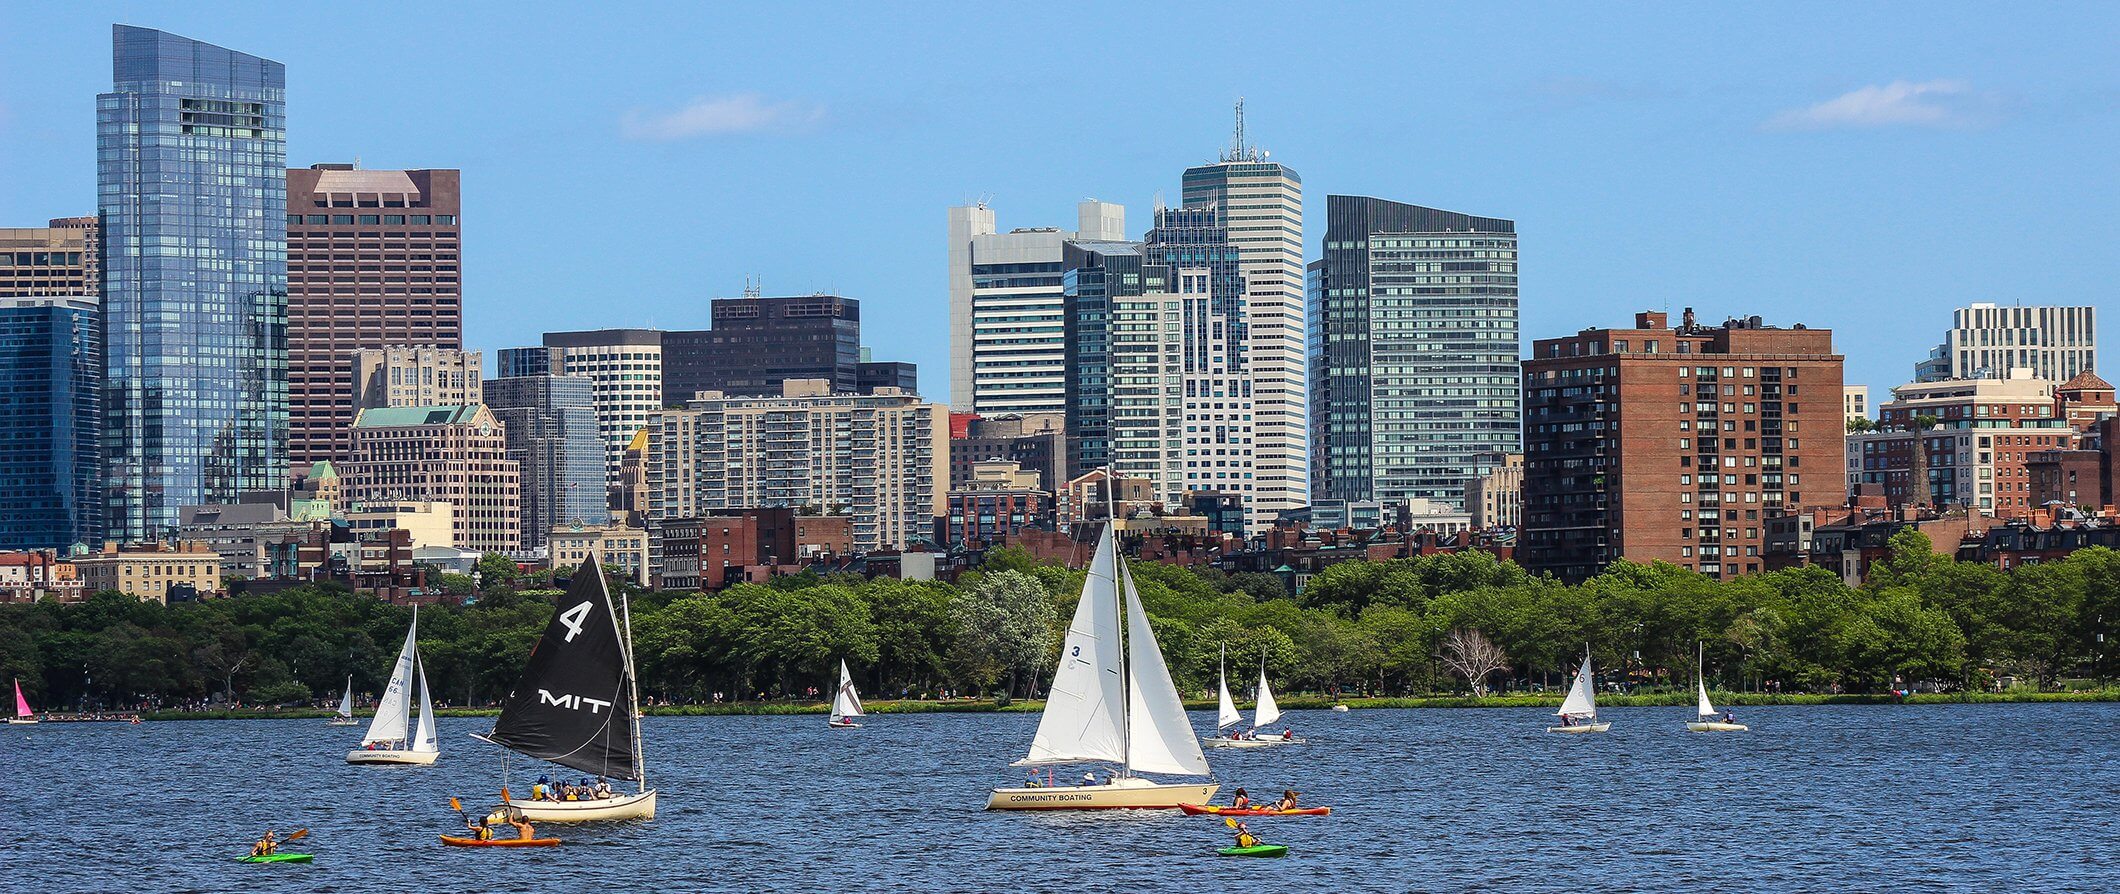 view of Boston taken from the river. Sailboats on the river tall buildings in the background.